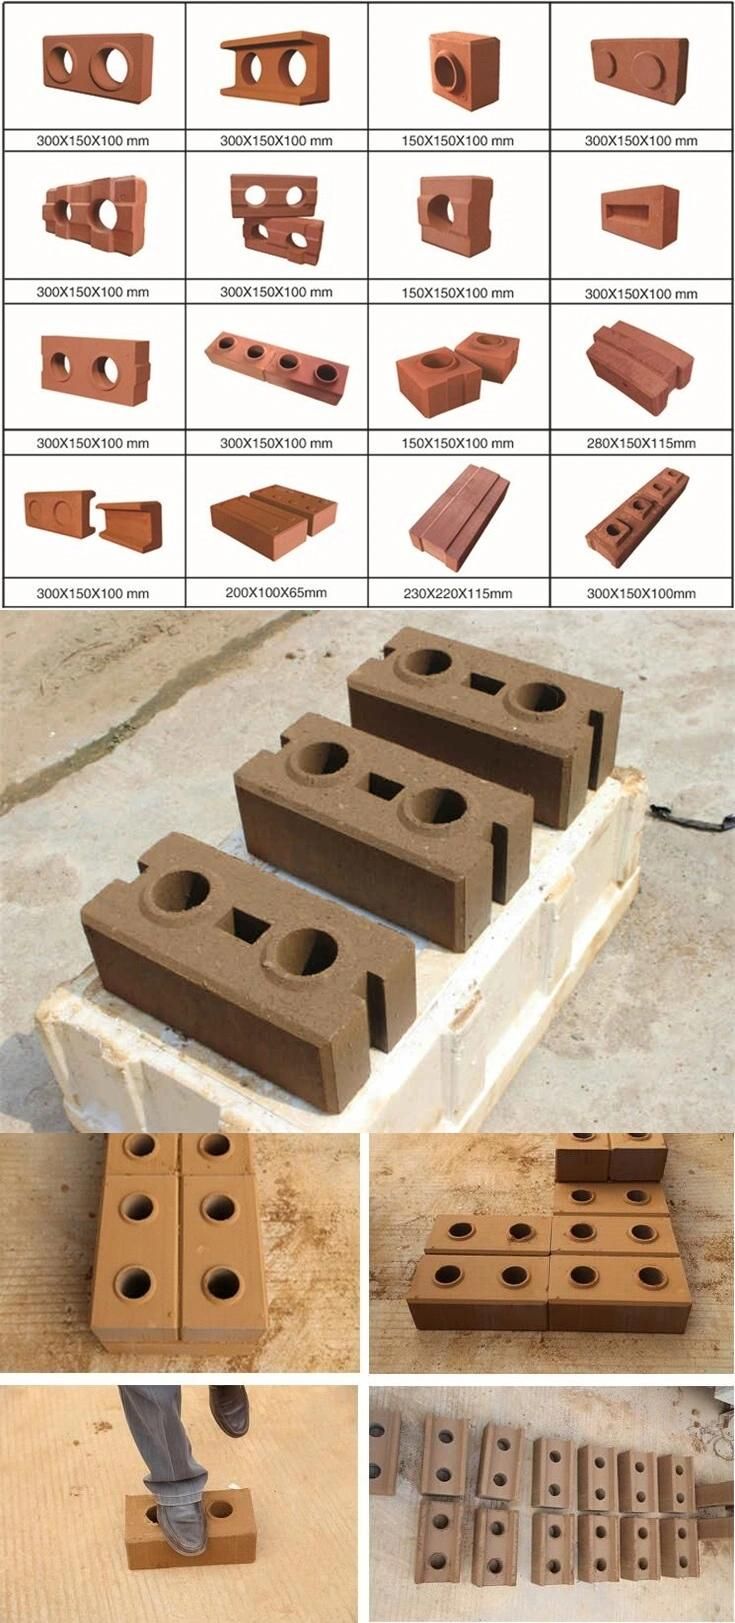 Small Business Xm4-10 Clay Soil Earth Lego Interlocking Brick Making Machine with High Quality